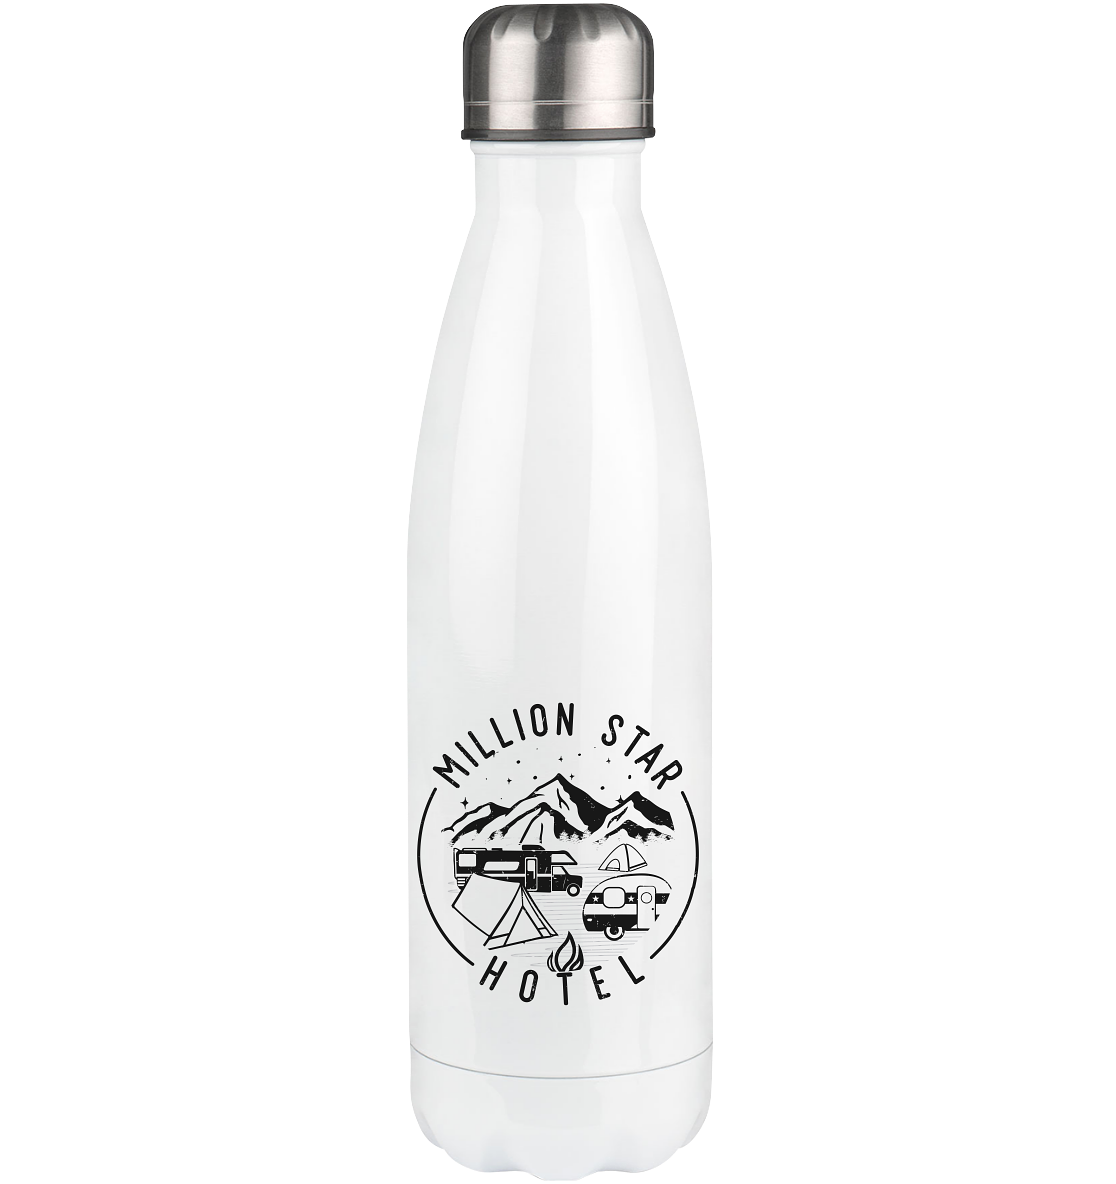 Million Star Hotel - Edelstahl Thermosflasche camping 500ml